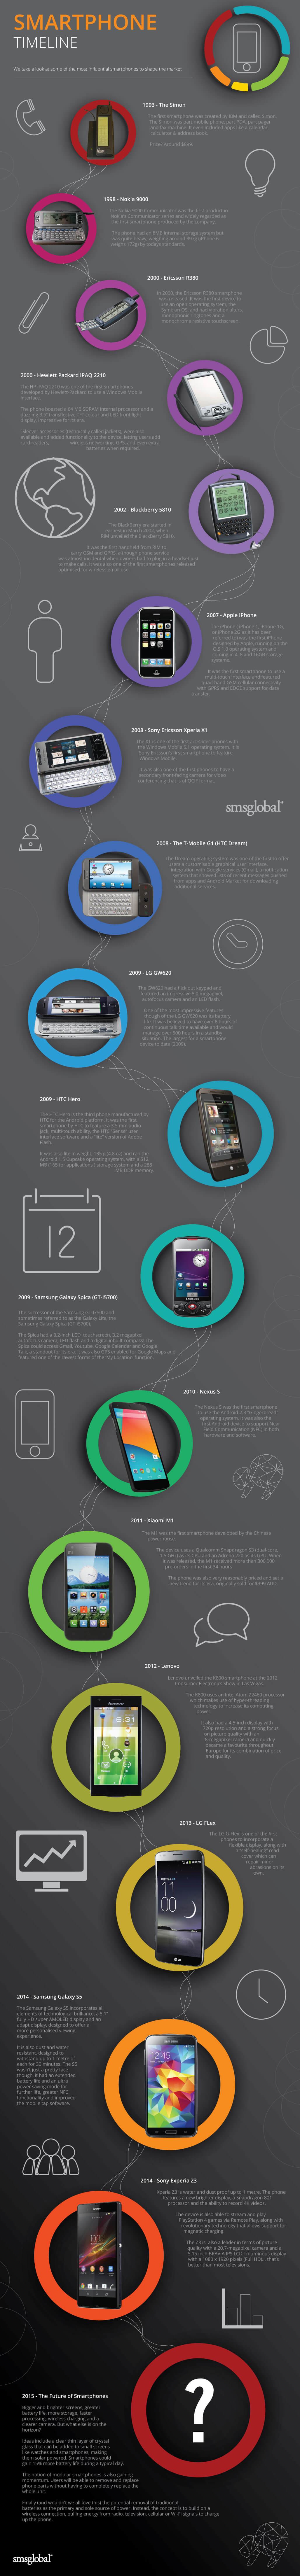 Infographic: The Evolution Of The Smartphone